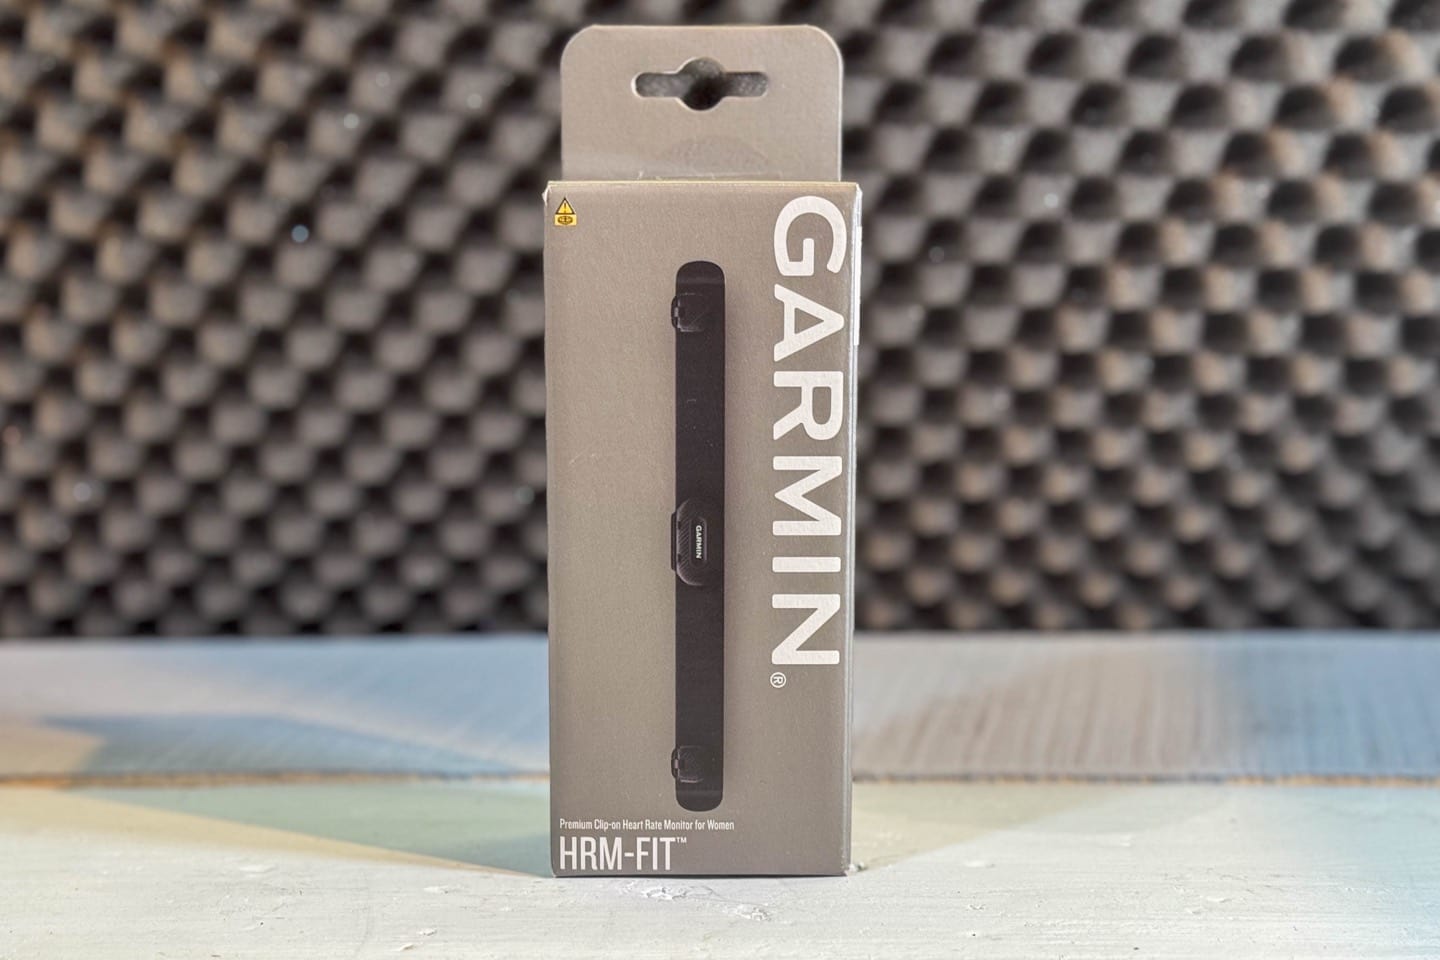 New Garmin HRM-Fit heart rate monitor clips into your sports bra